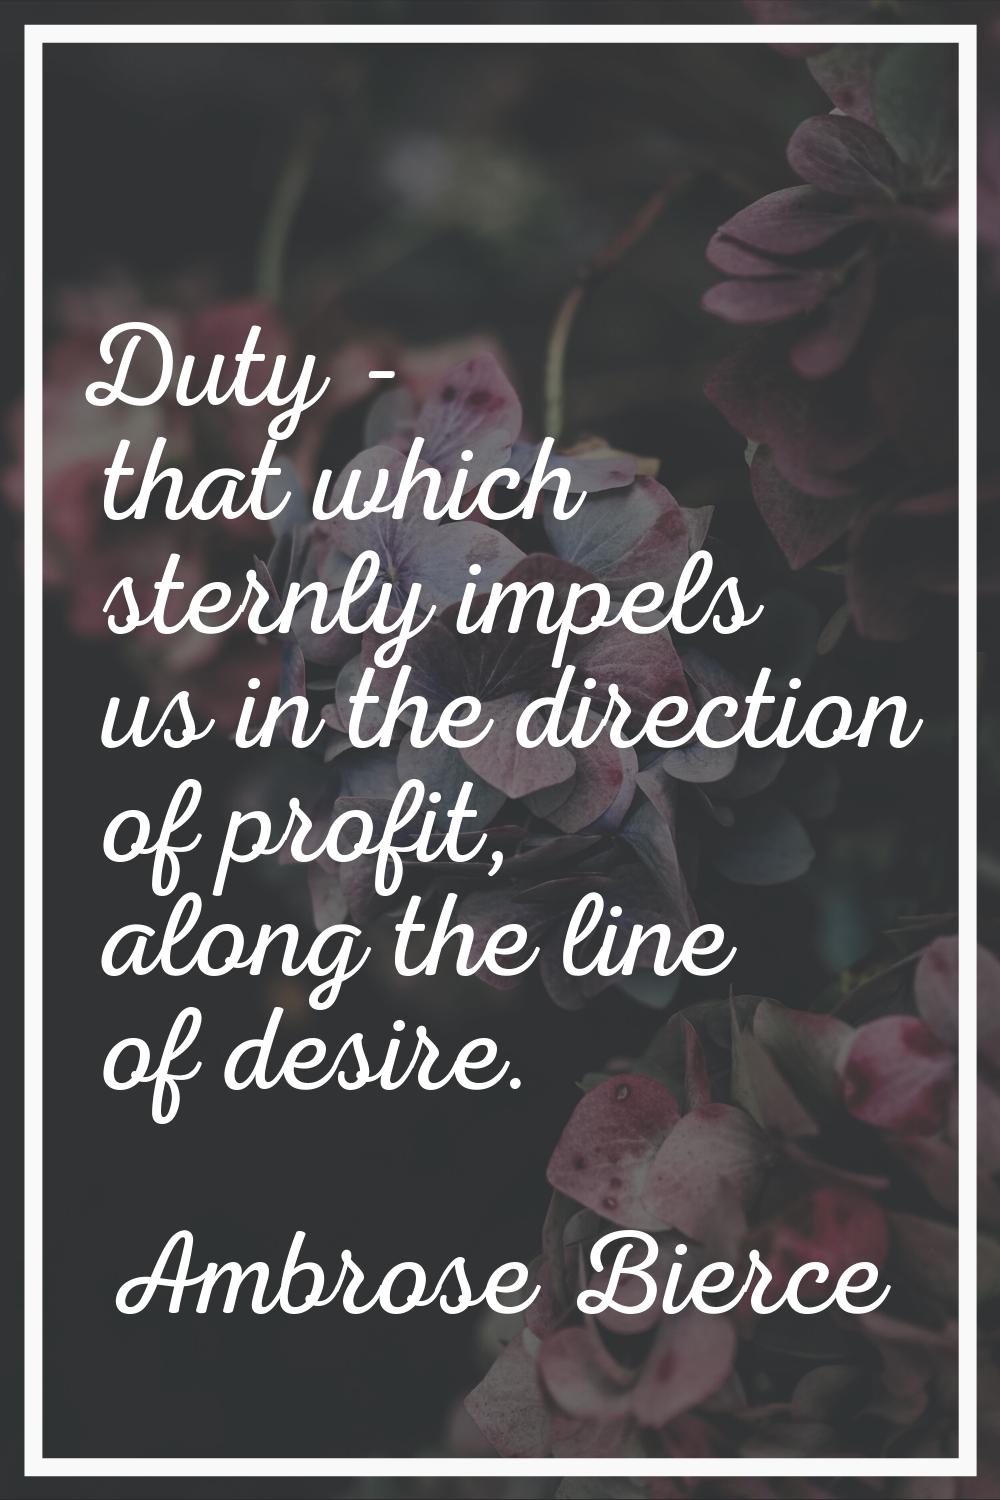 Duty - that which sternly impels us in the direction of profit, along the line of desire.